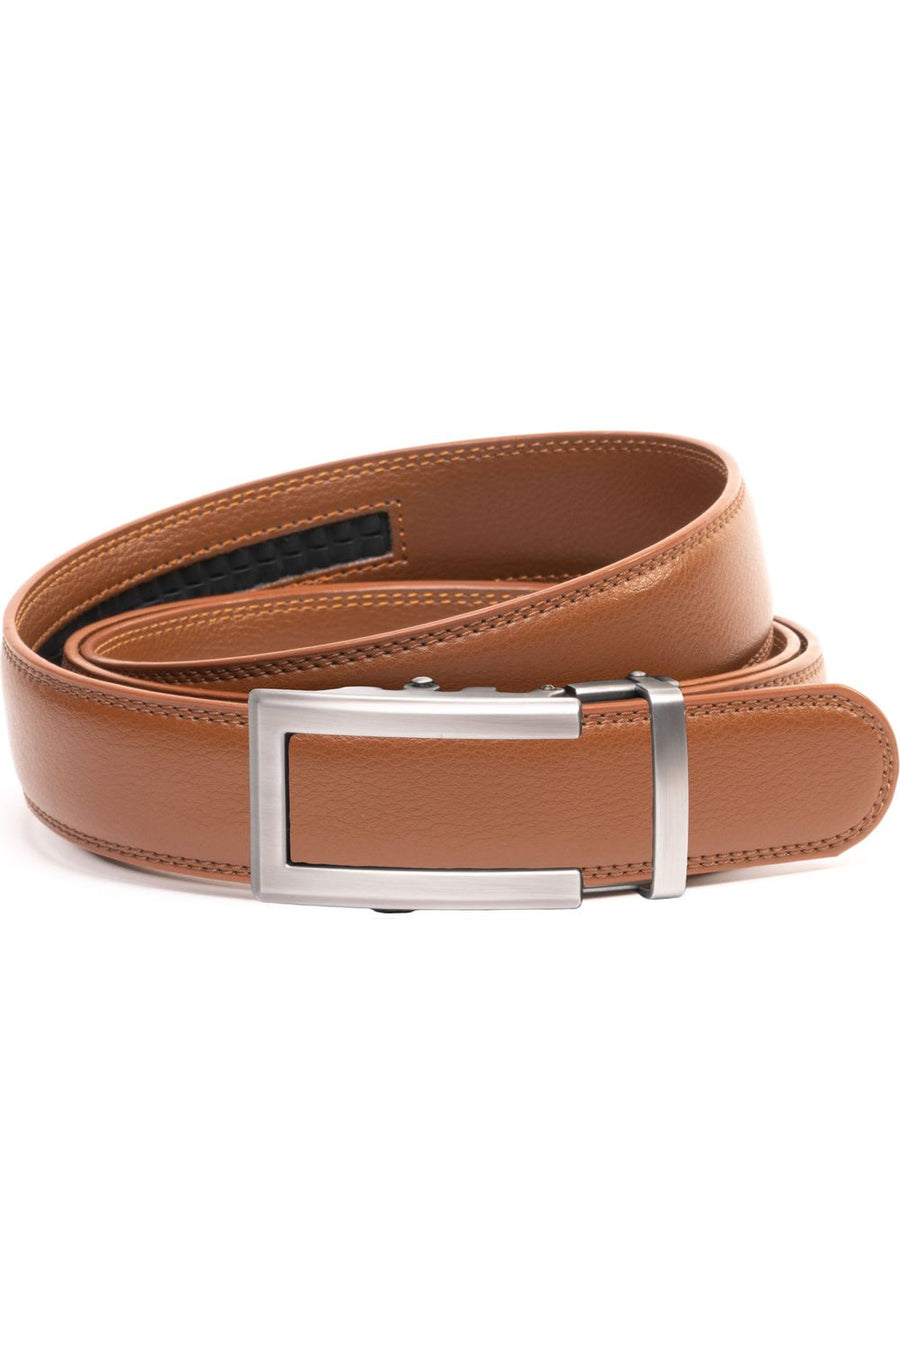 Belts · The Missionary Store